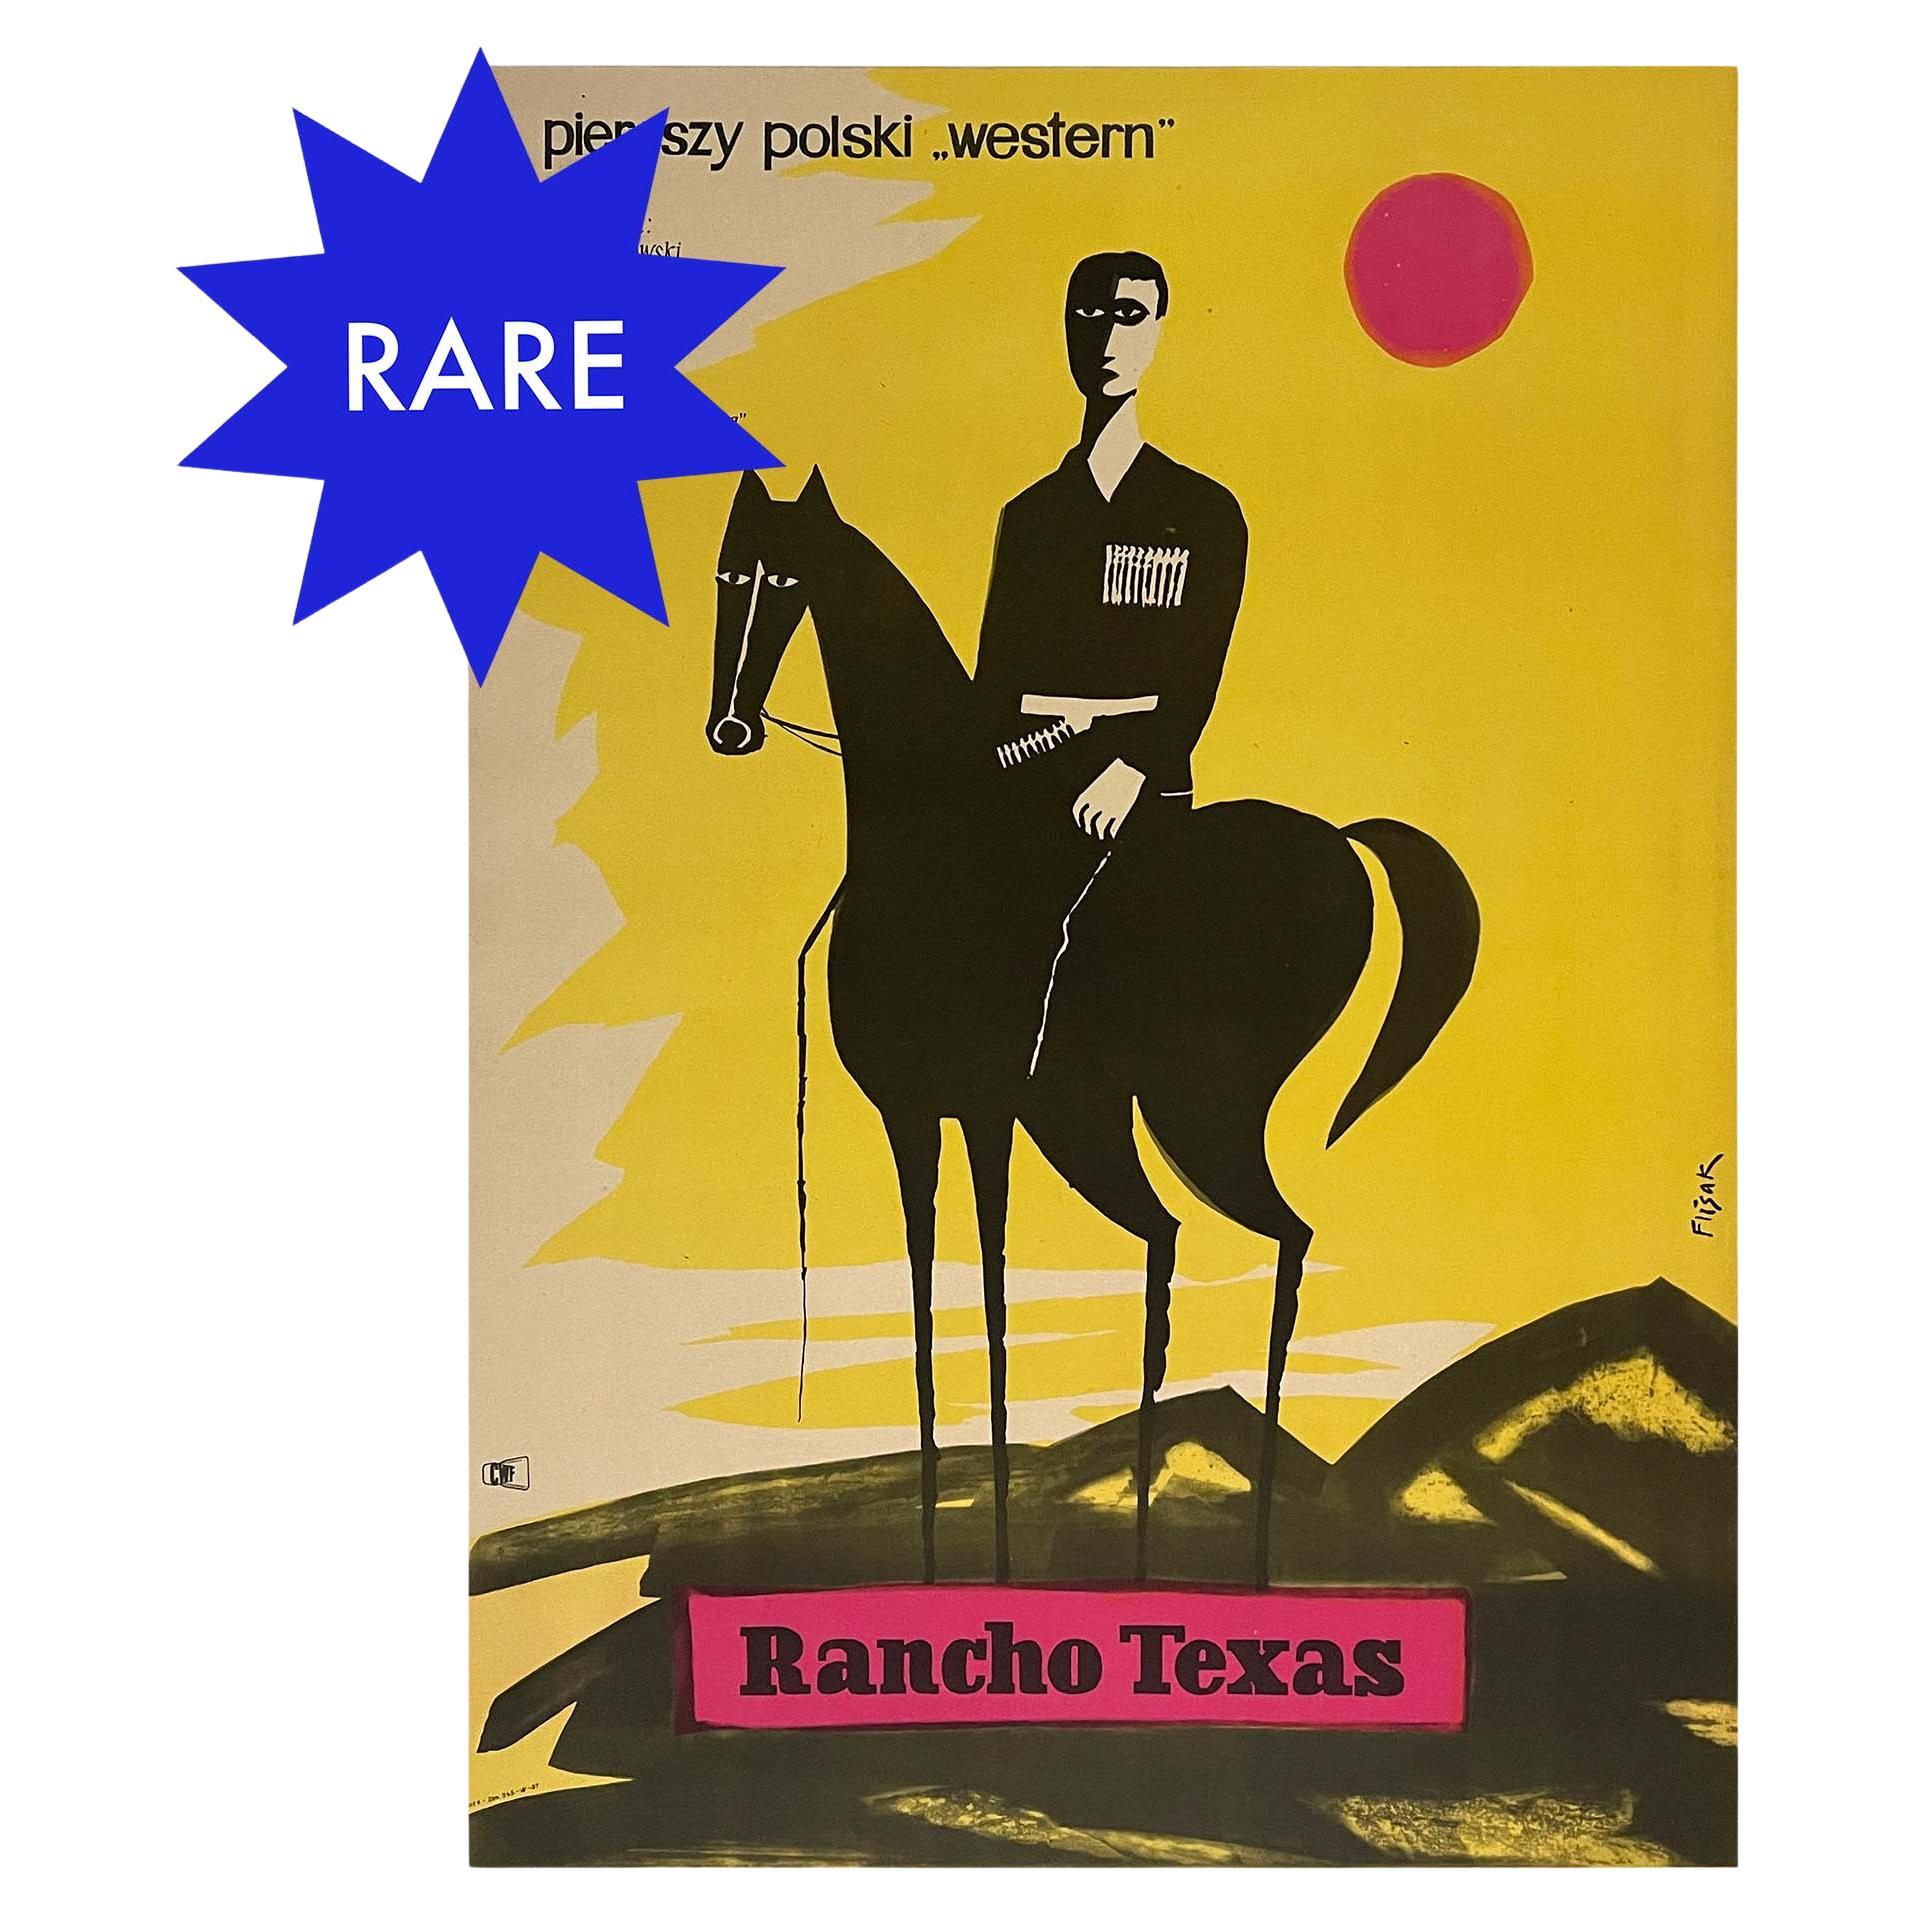 Rare and beautiful film poster designed by Jerzy Flisak in 1959 for Polish movie “Rancho Texas” directed by Wadim Berestowski.

Polish A1 size: 58.5 x 83 cm

